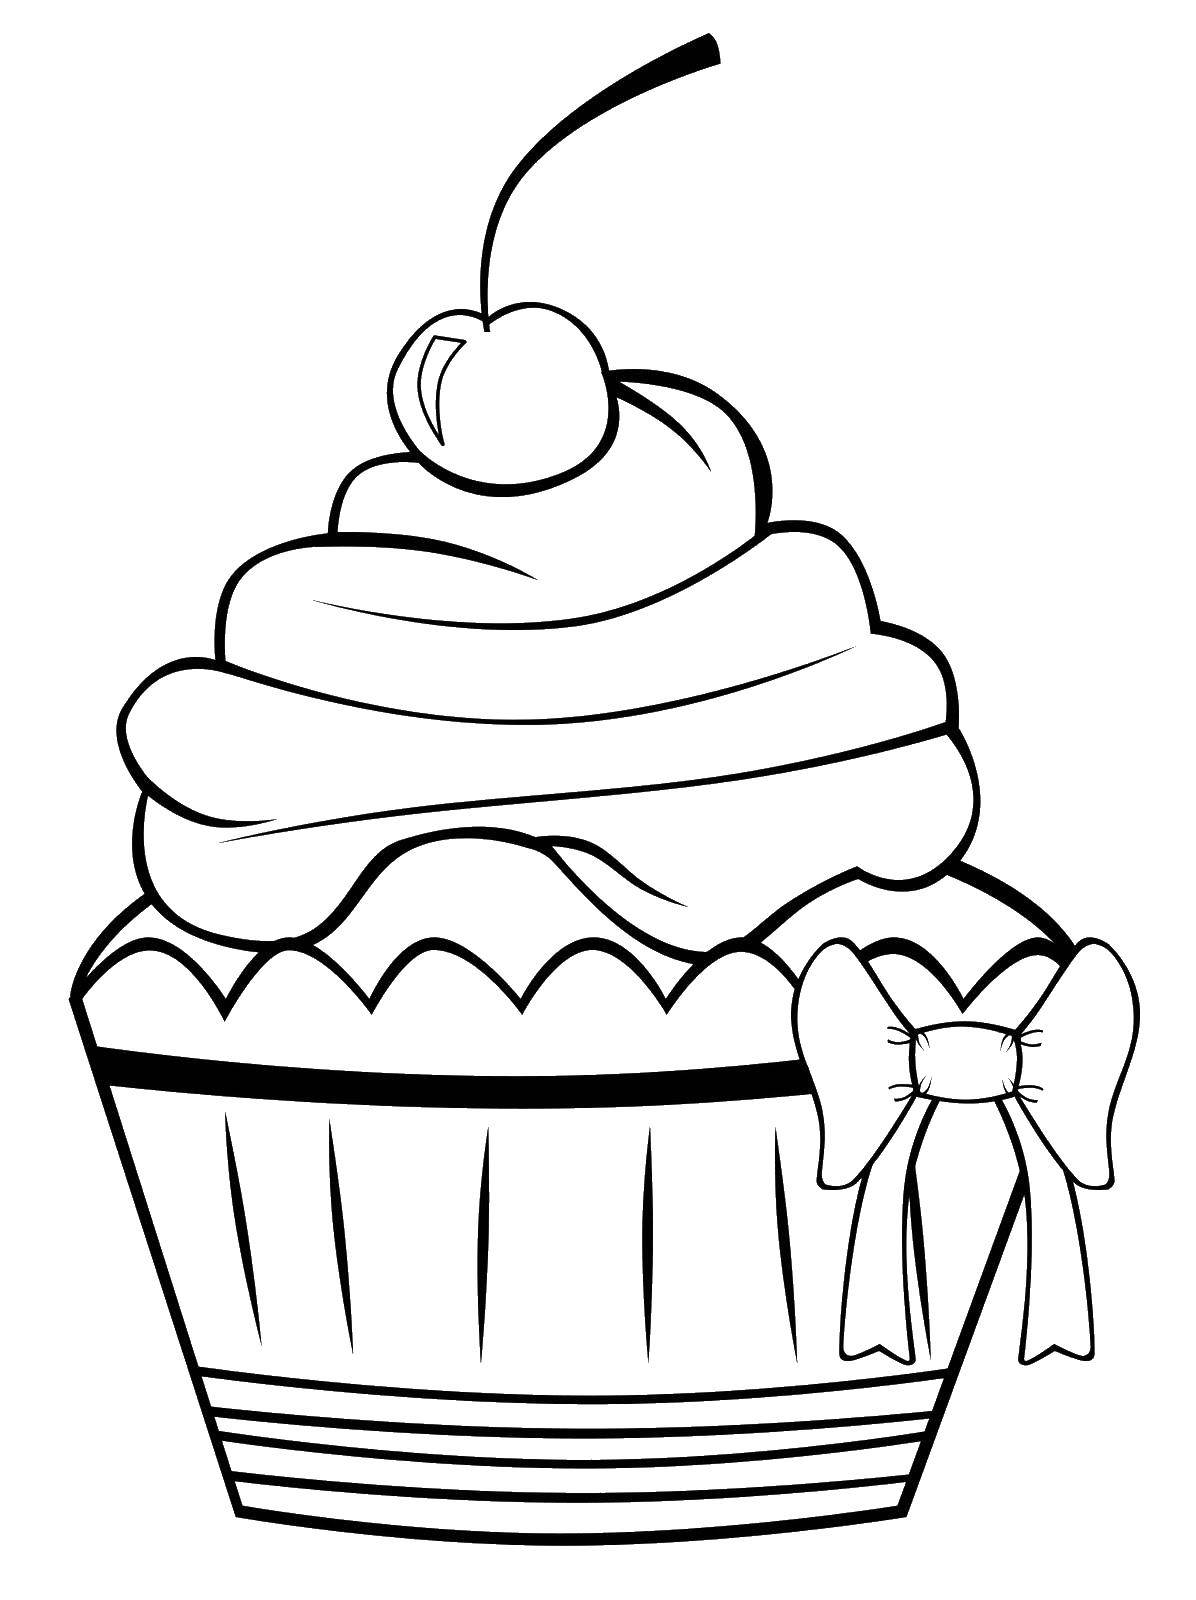 Coloring Cute cupcake. Category cakes. Tags:  cakes, cupcakes.